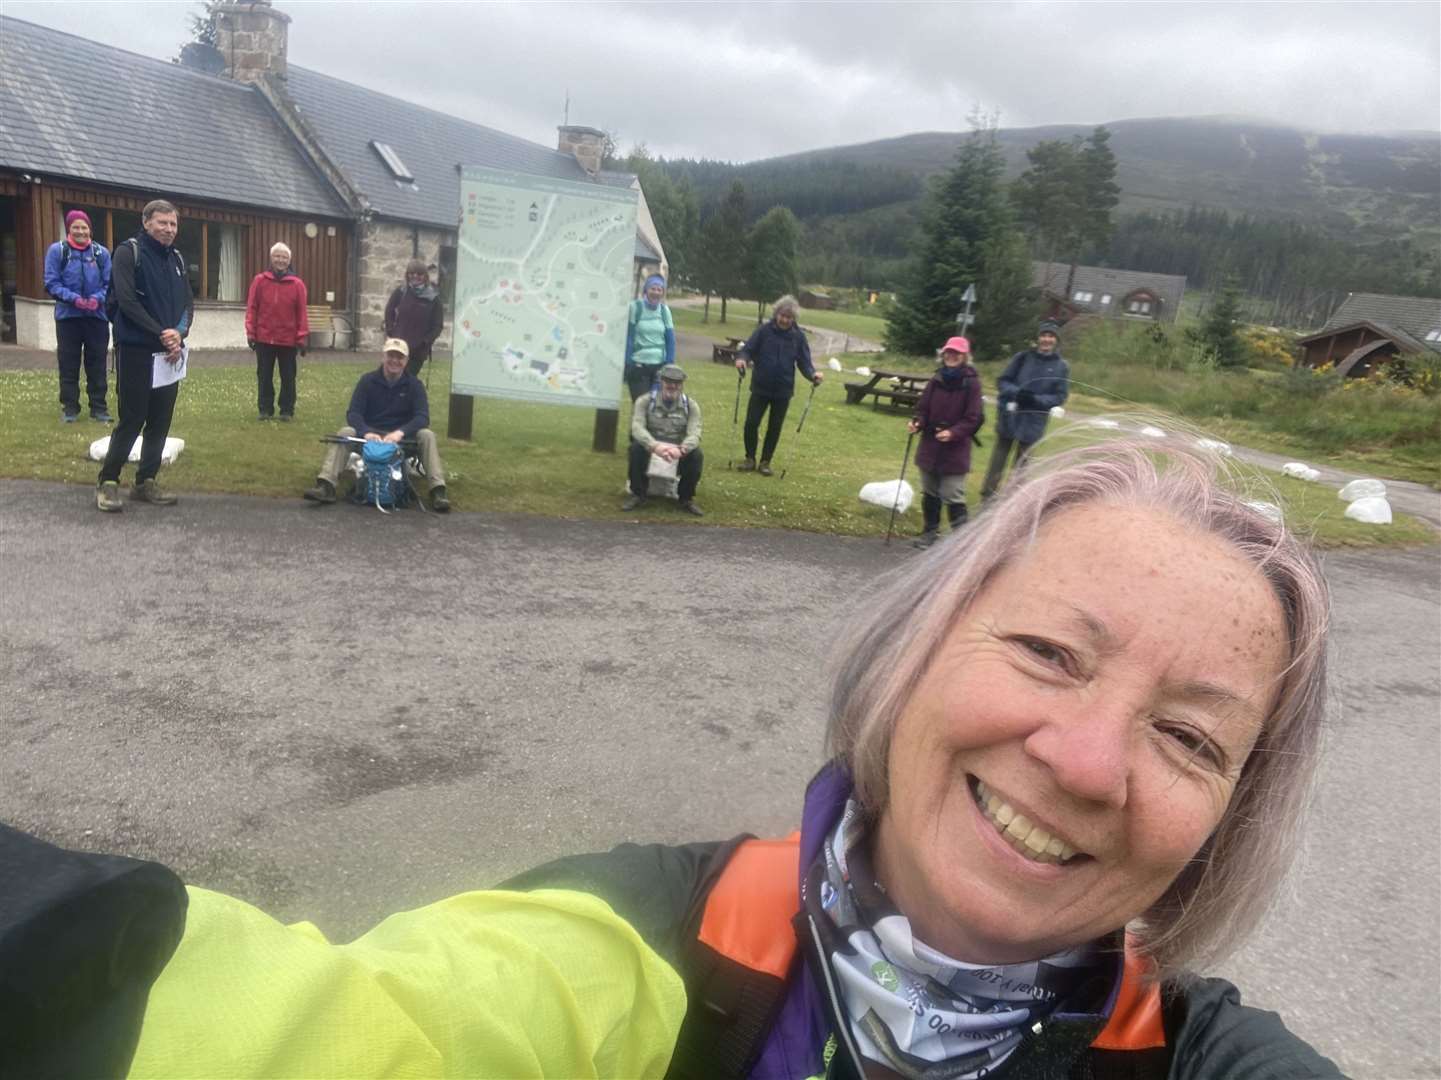 Julie Cribb with members of the local LDWA group at Badaguish outdoor centre in the Cairngorms, just about to set off for a walk.